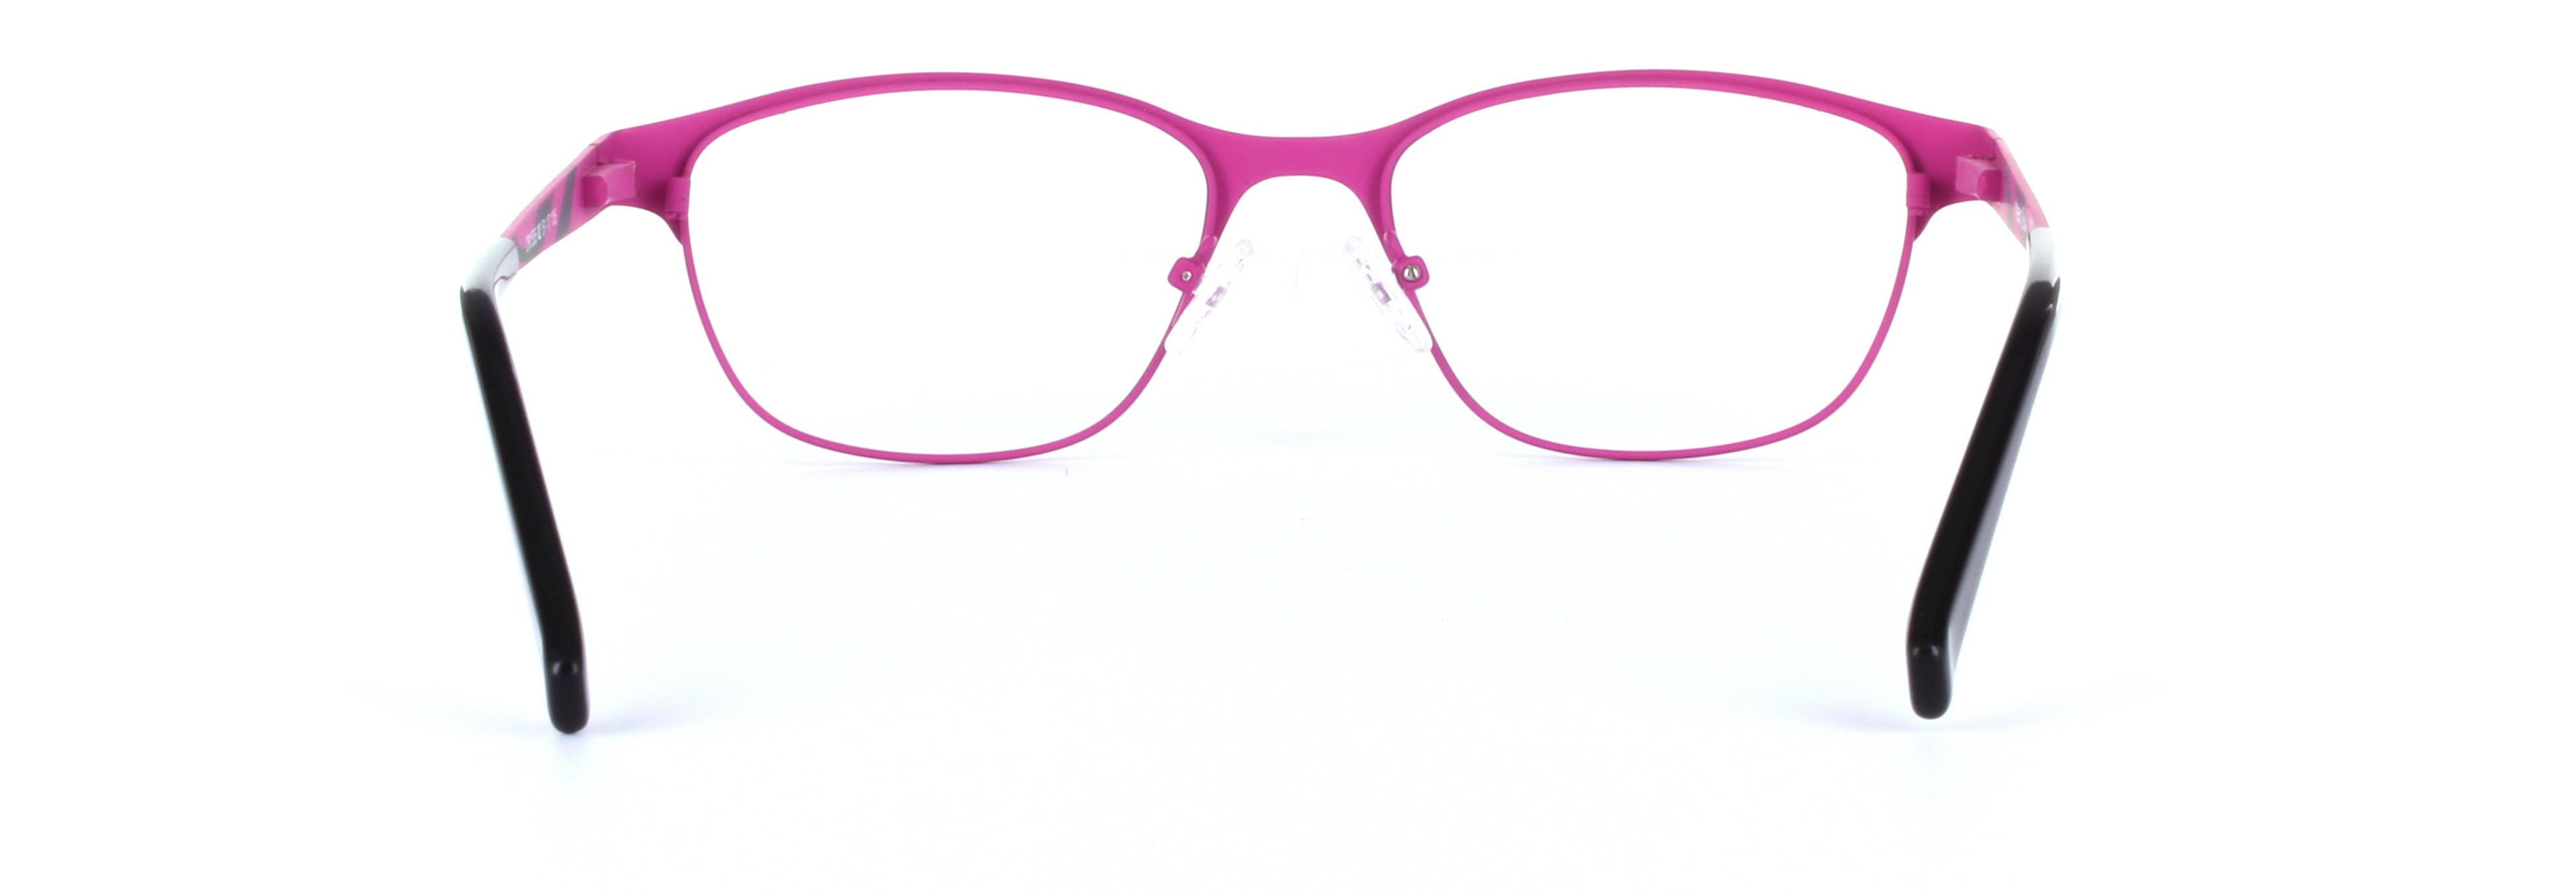 Lucie Brown and Pink Full Rim Oval Metal Glasses - Image View 3